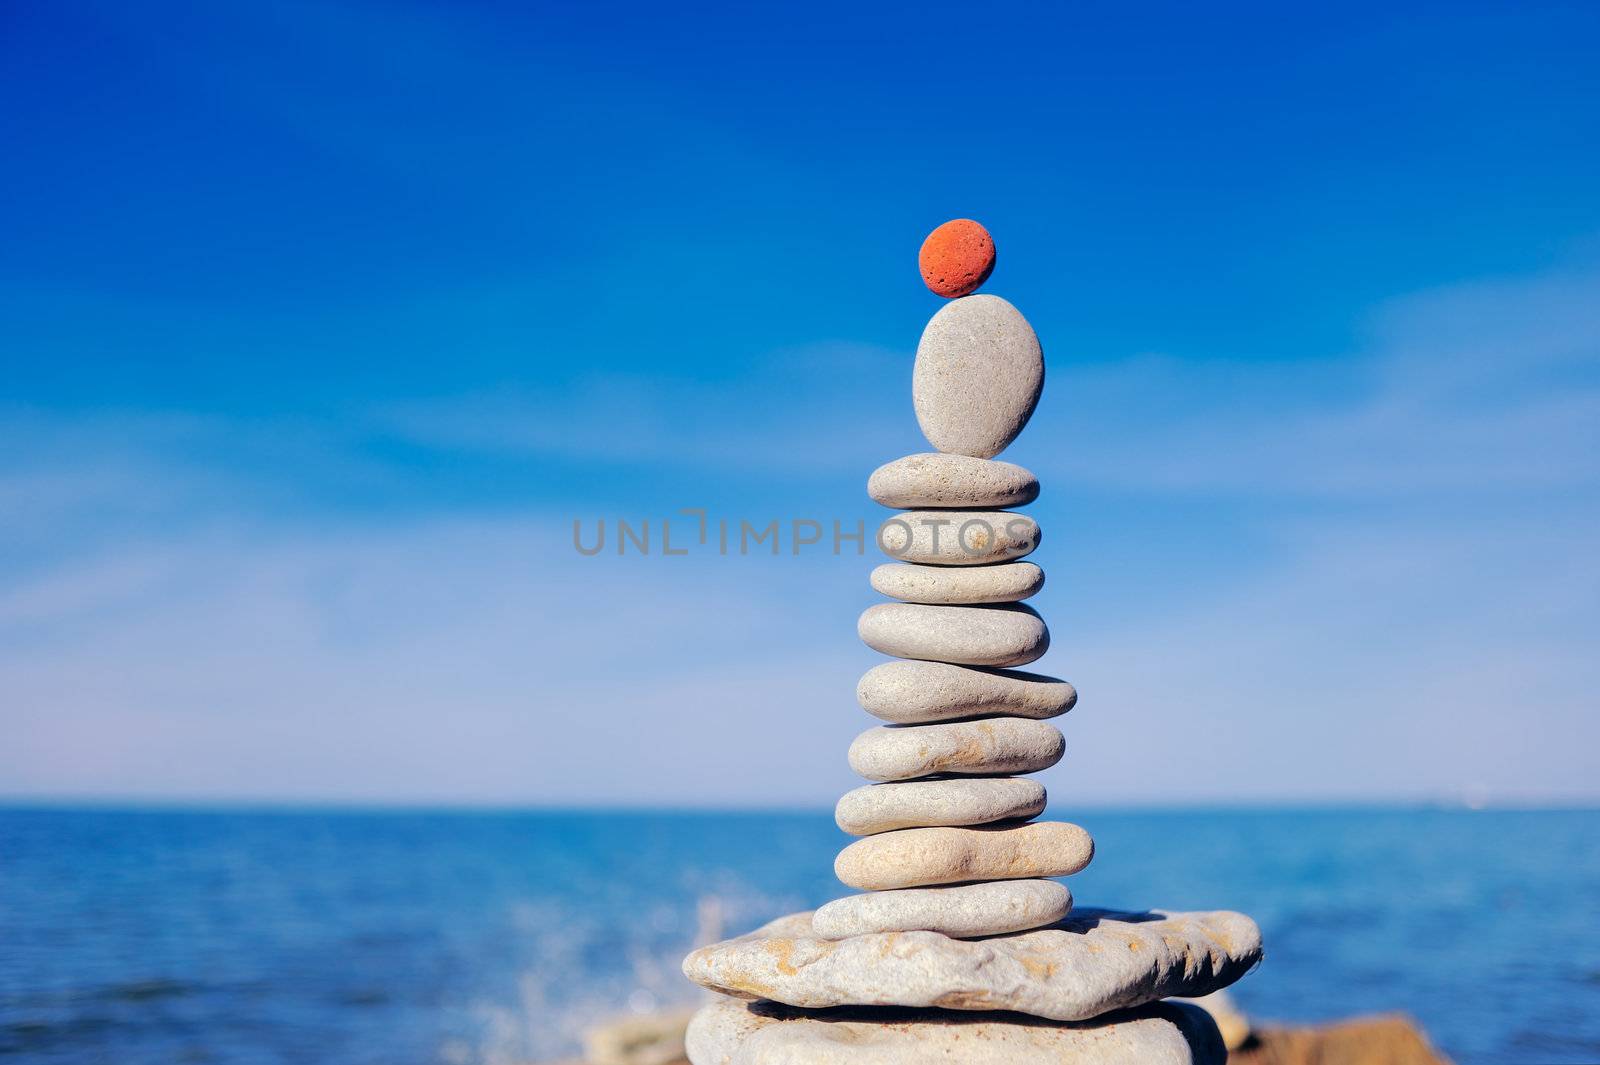 Balancing red stone on the top of pile of pebbles